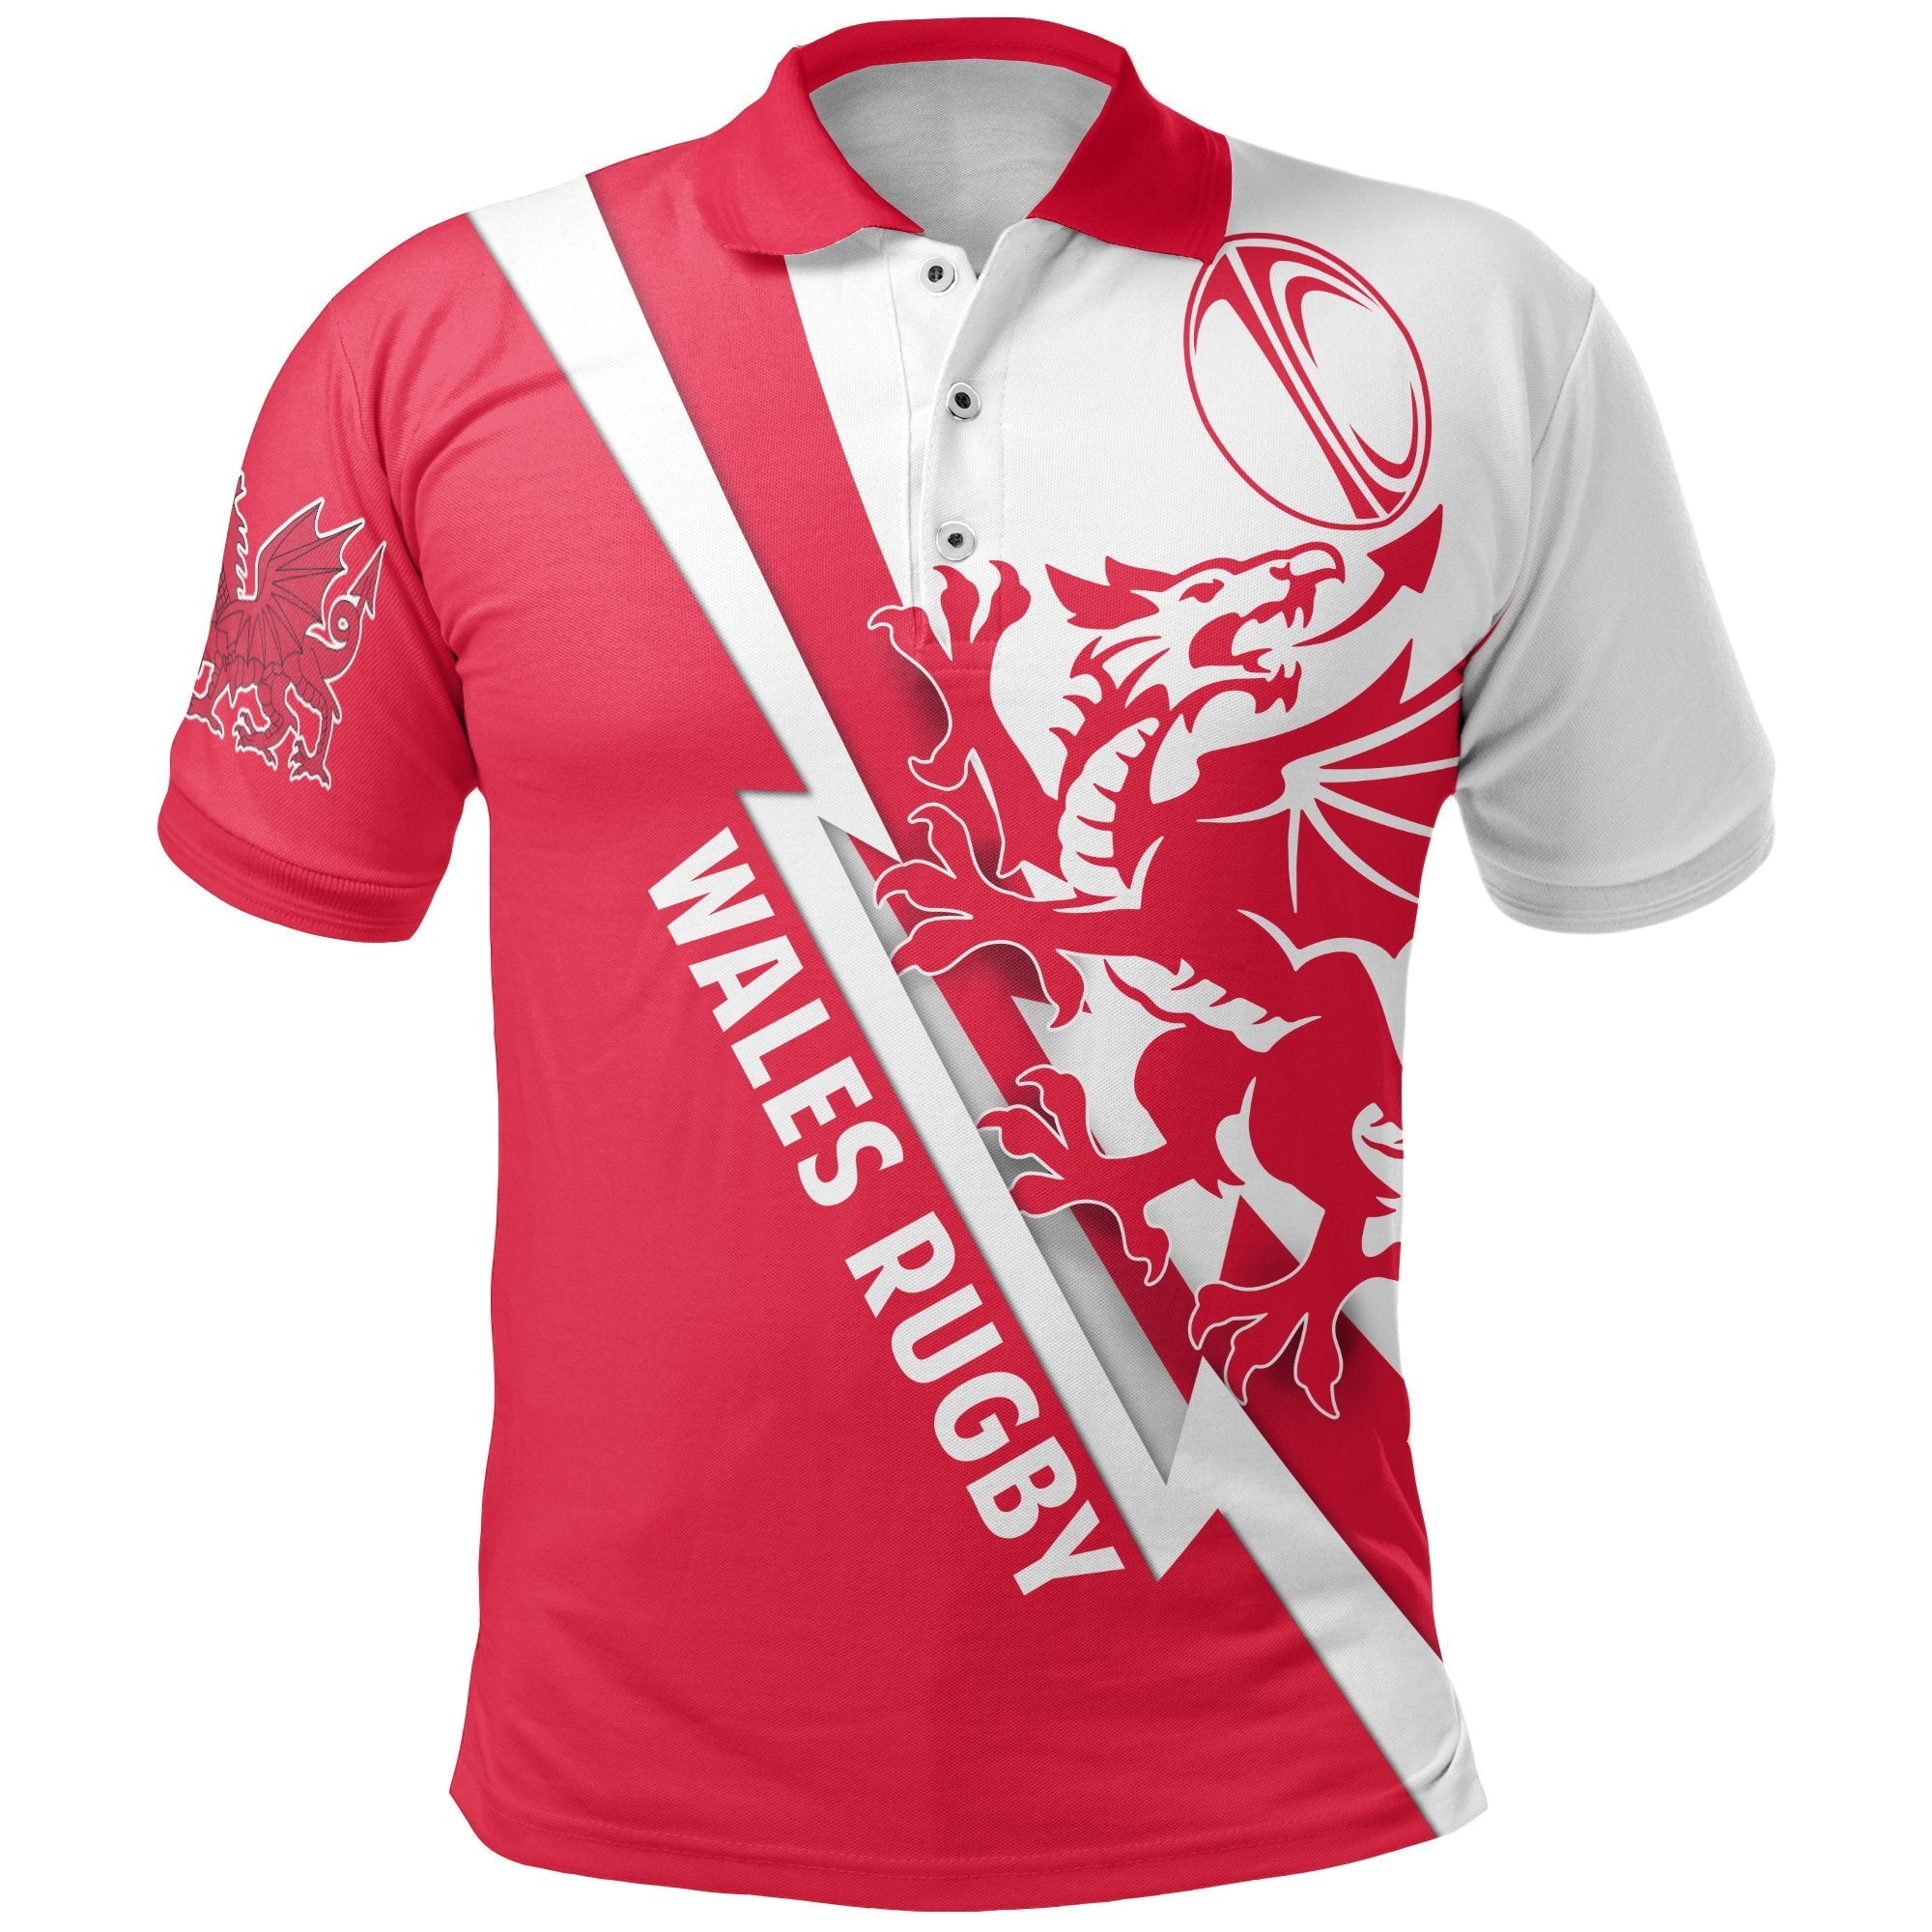 wales-rugby-polo-shirt-lighting-style